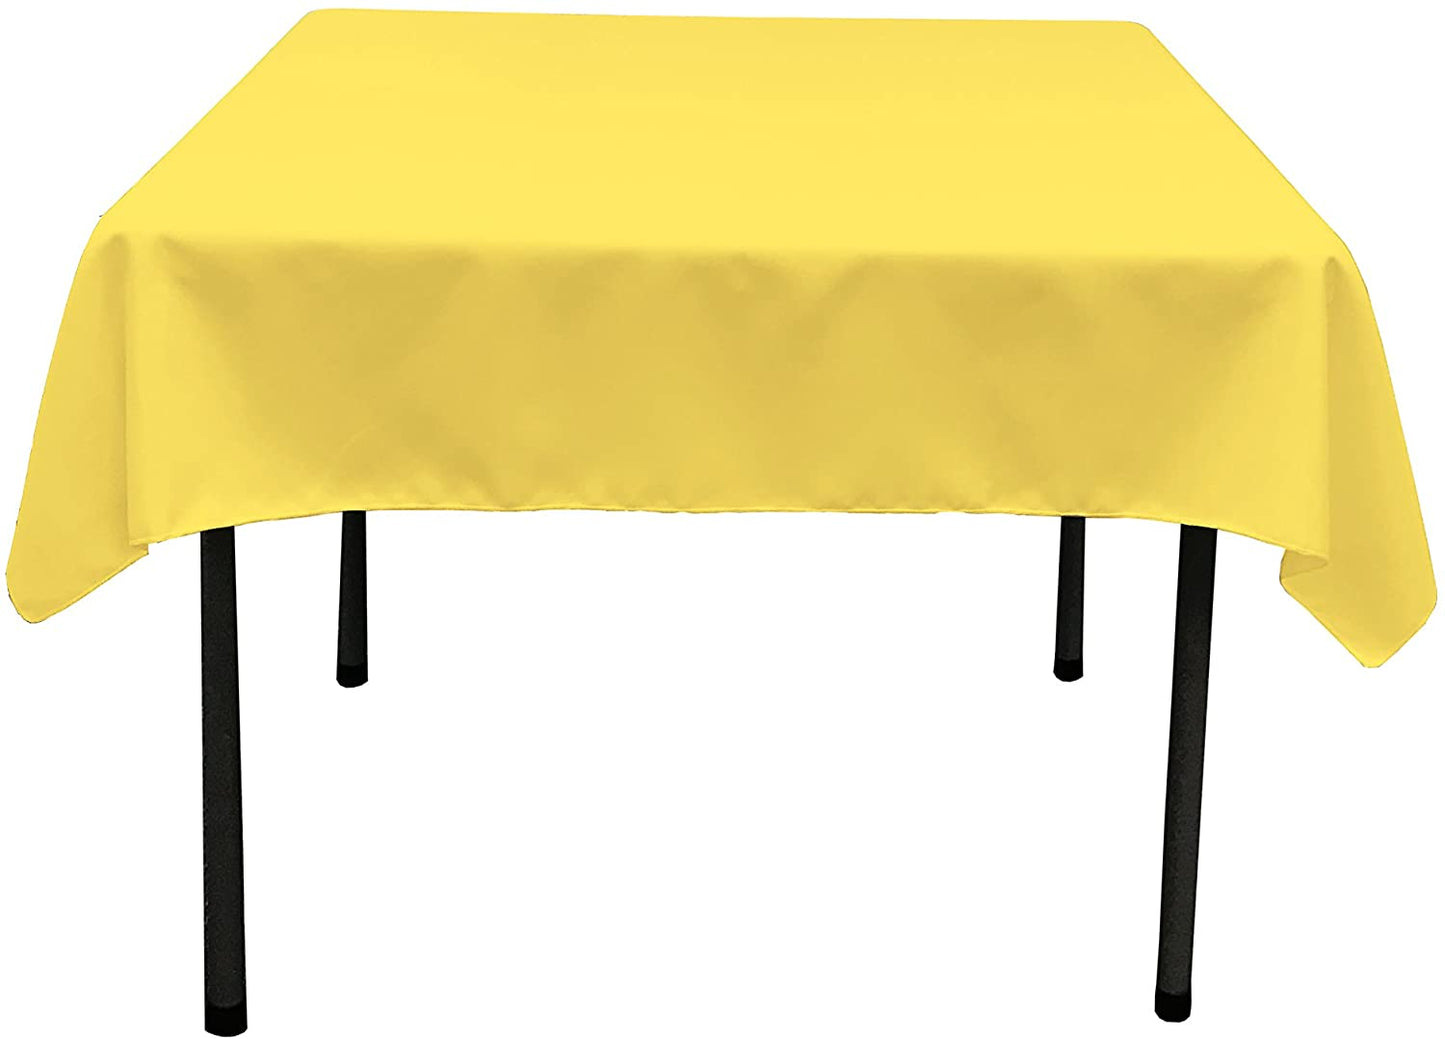 Polyester Poplin Washable Square Tablecloth, Stain and Wrinkle Resistant Table Cover Lt Yellow